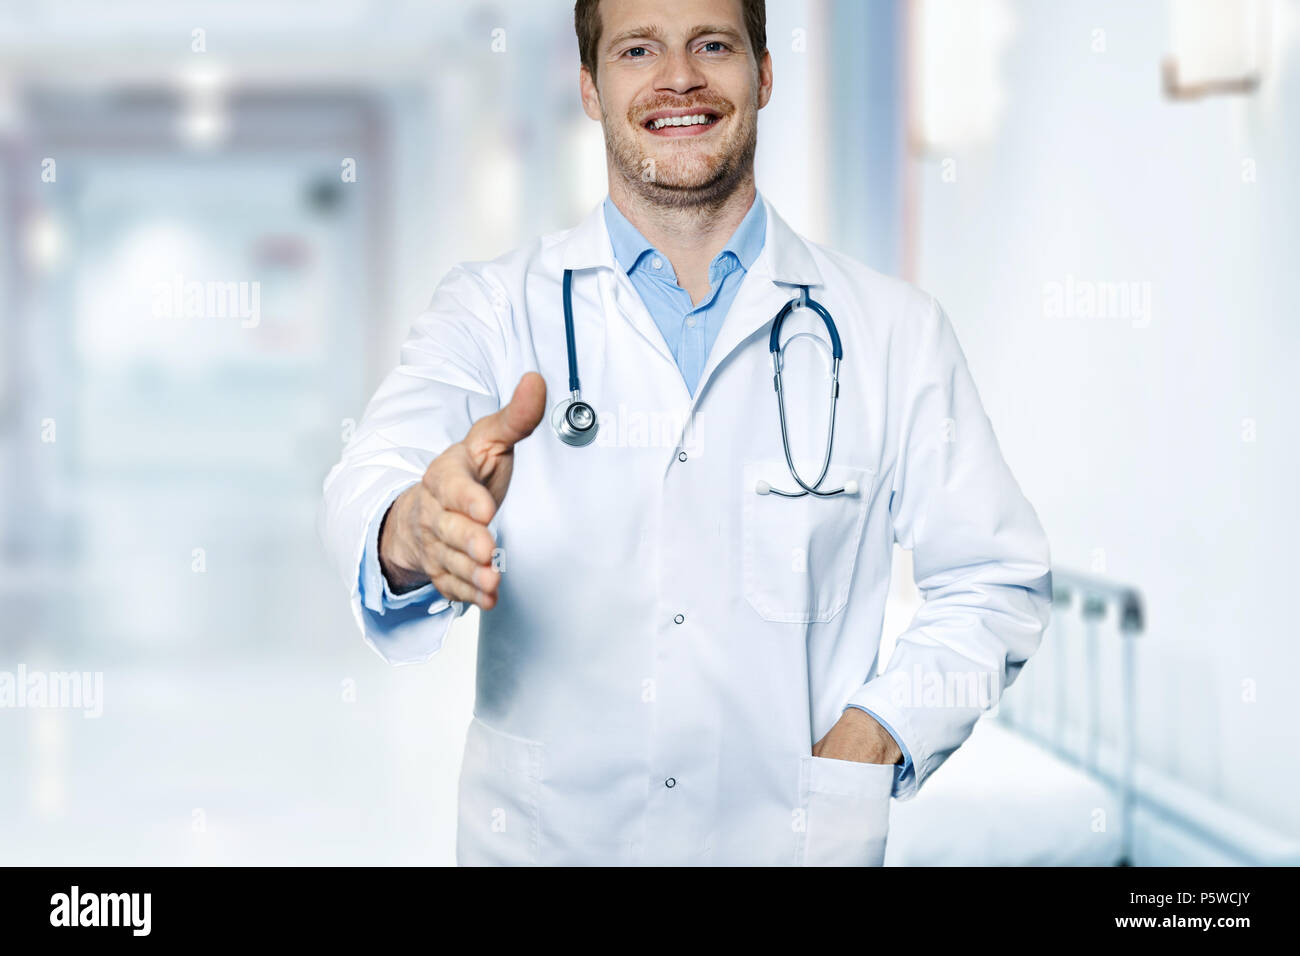 friendly smiling doctor standing in hospital hallway ready for handshake Stock Photo